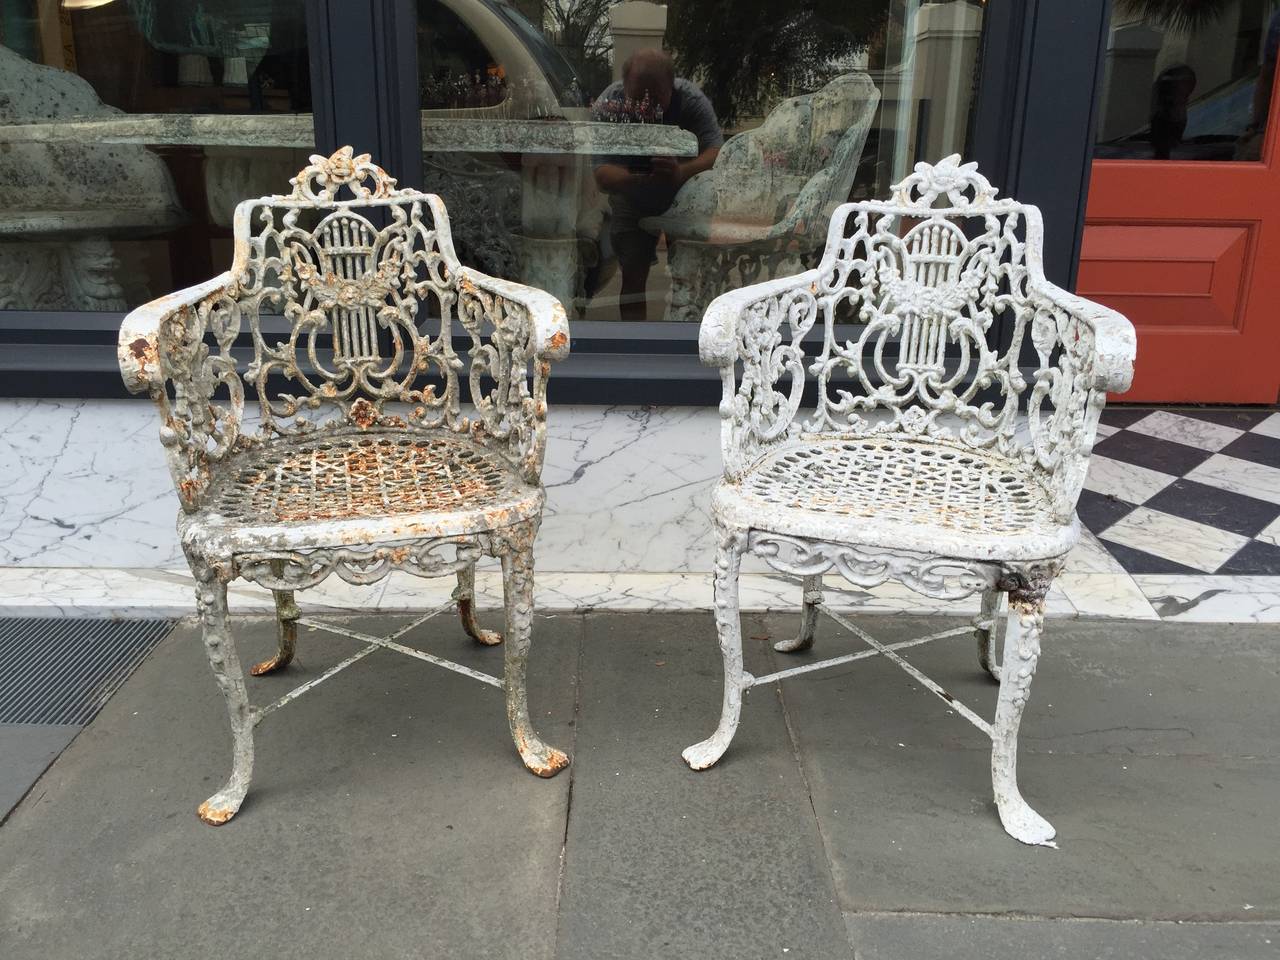 Great Britain (UK) Pair of English Cast Iron Garden Chairs, Late 19th Century